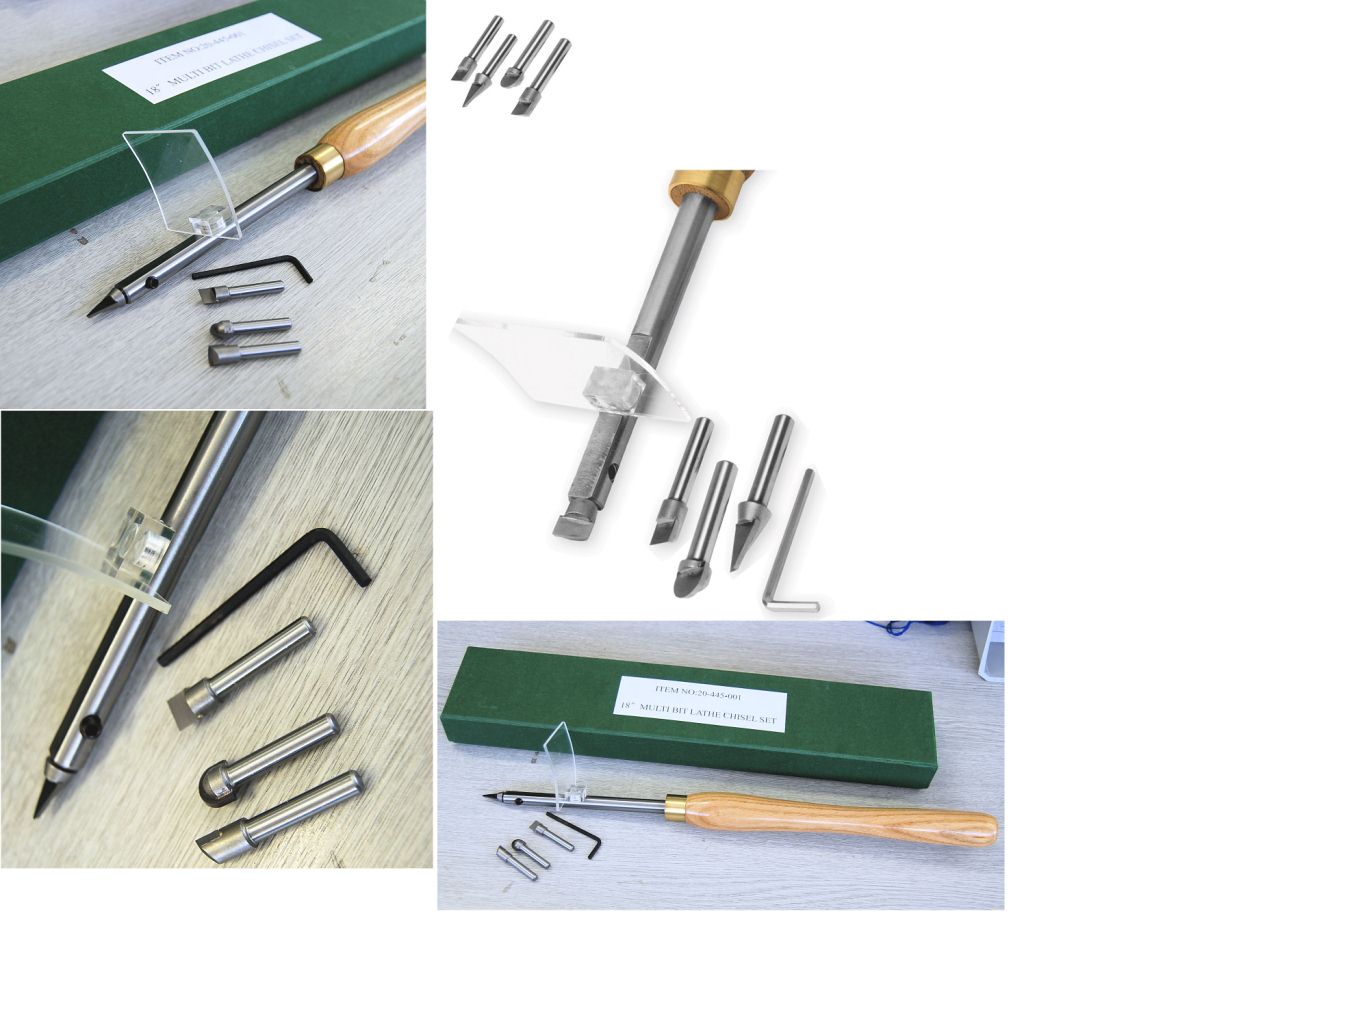 18 inch Multi Bit Lathe Chisel Set with 4 Carbide Cutters